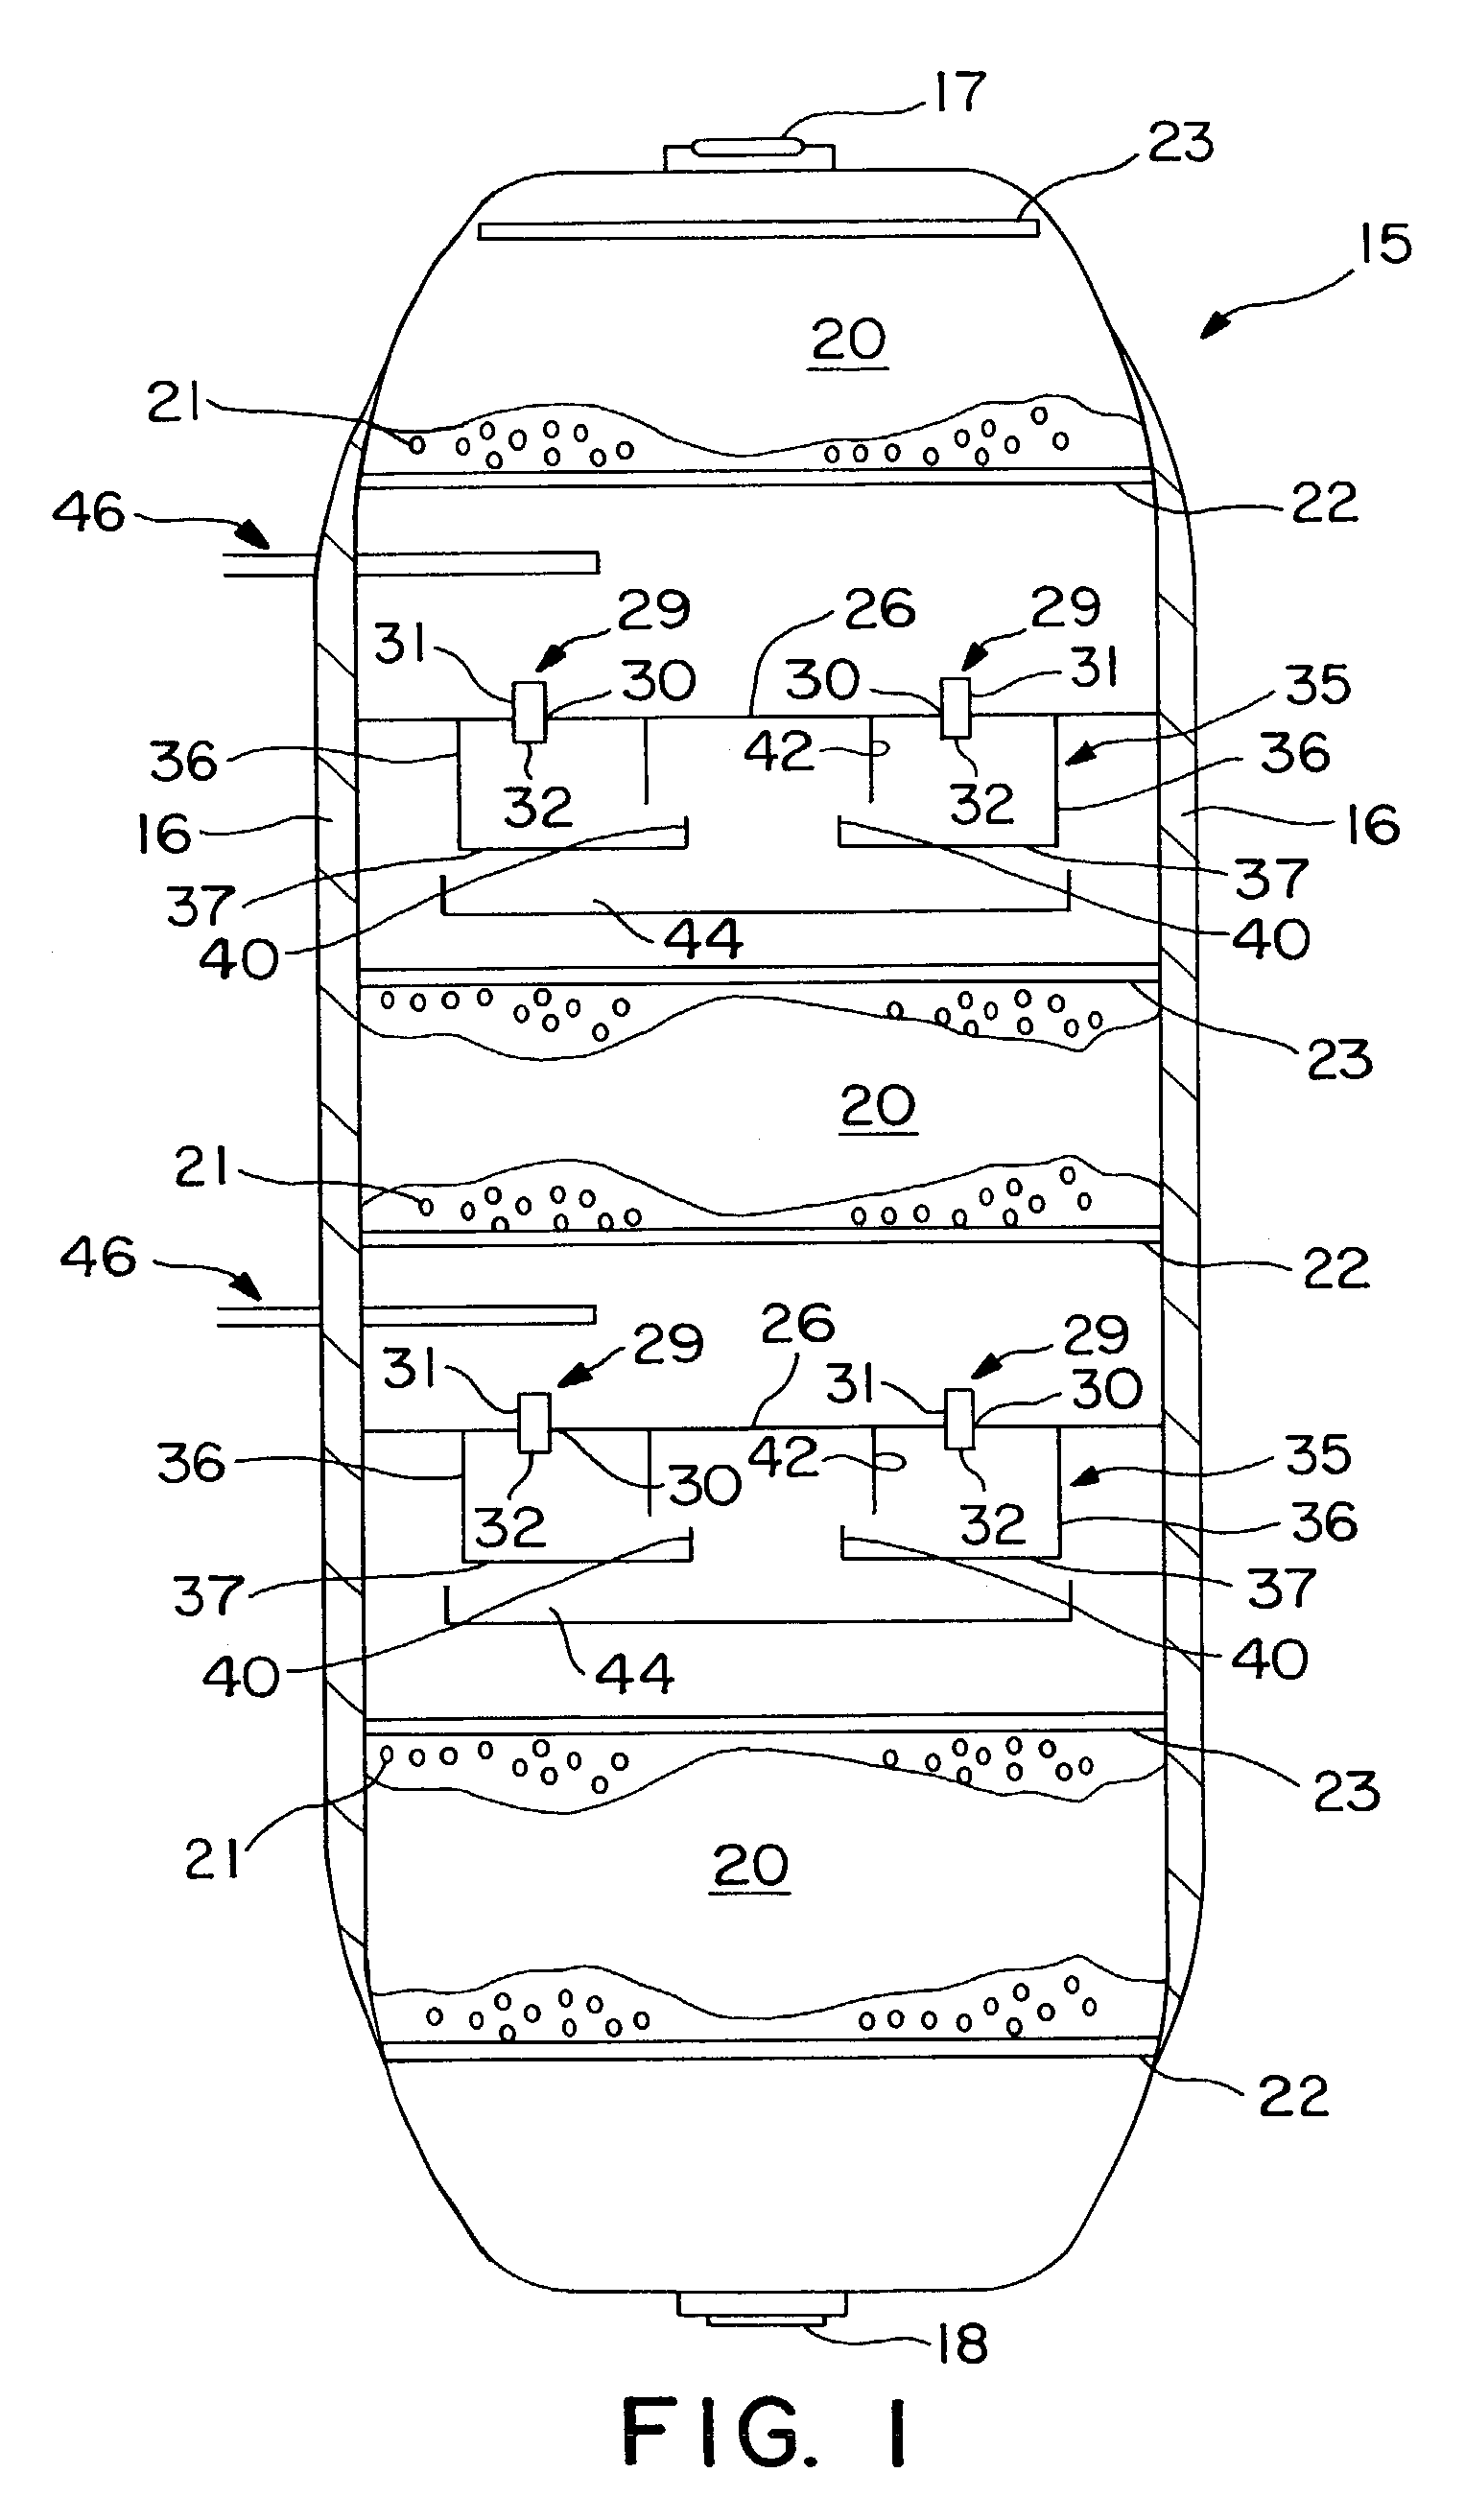 Multiphase mixing device with staged gas introduction